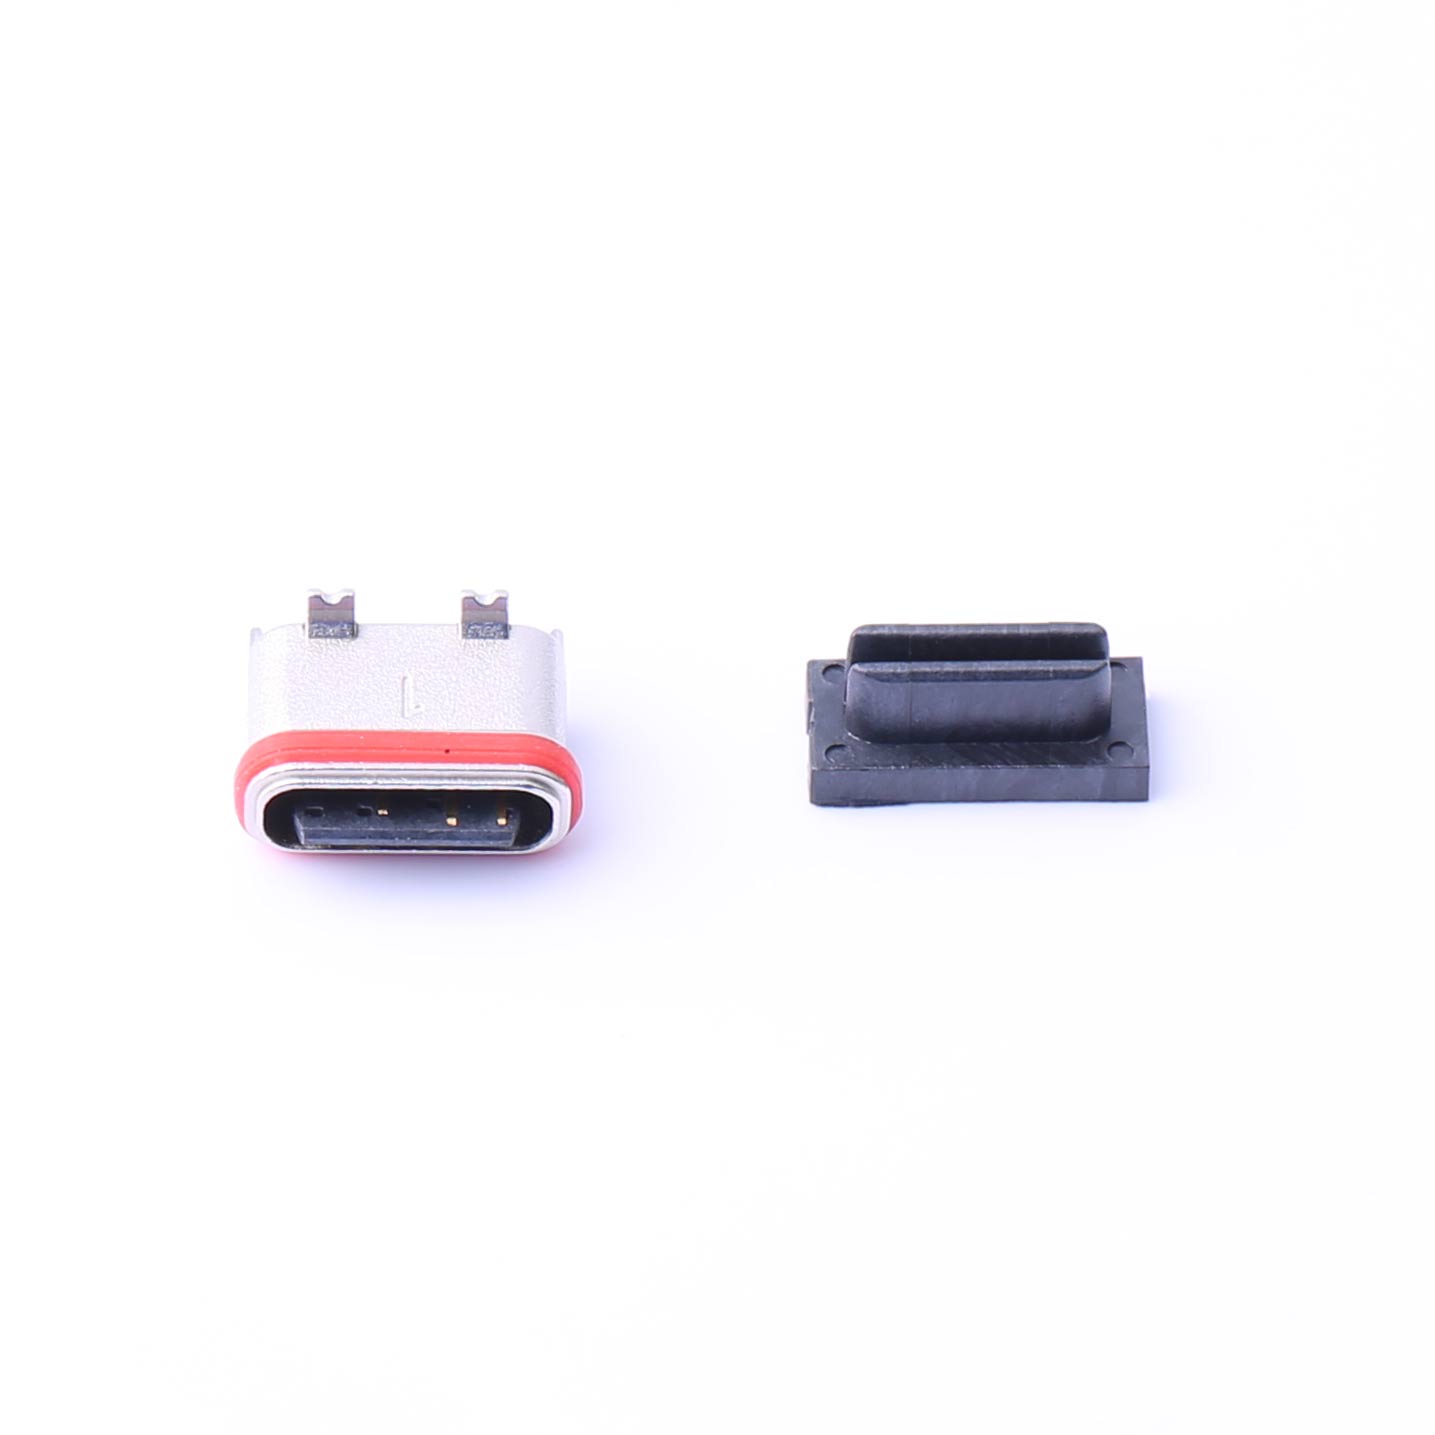 Kinghelm USB Type-C Connector Waterproof base stand - KH-TYPE-C-L.FS-6P-STM